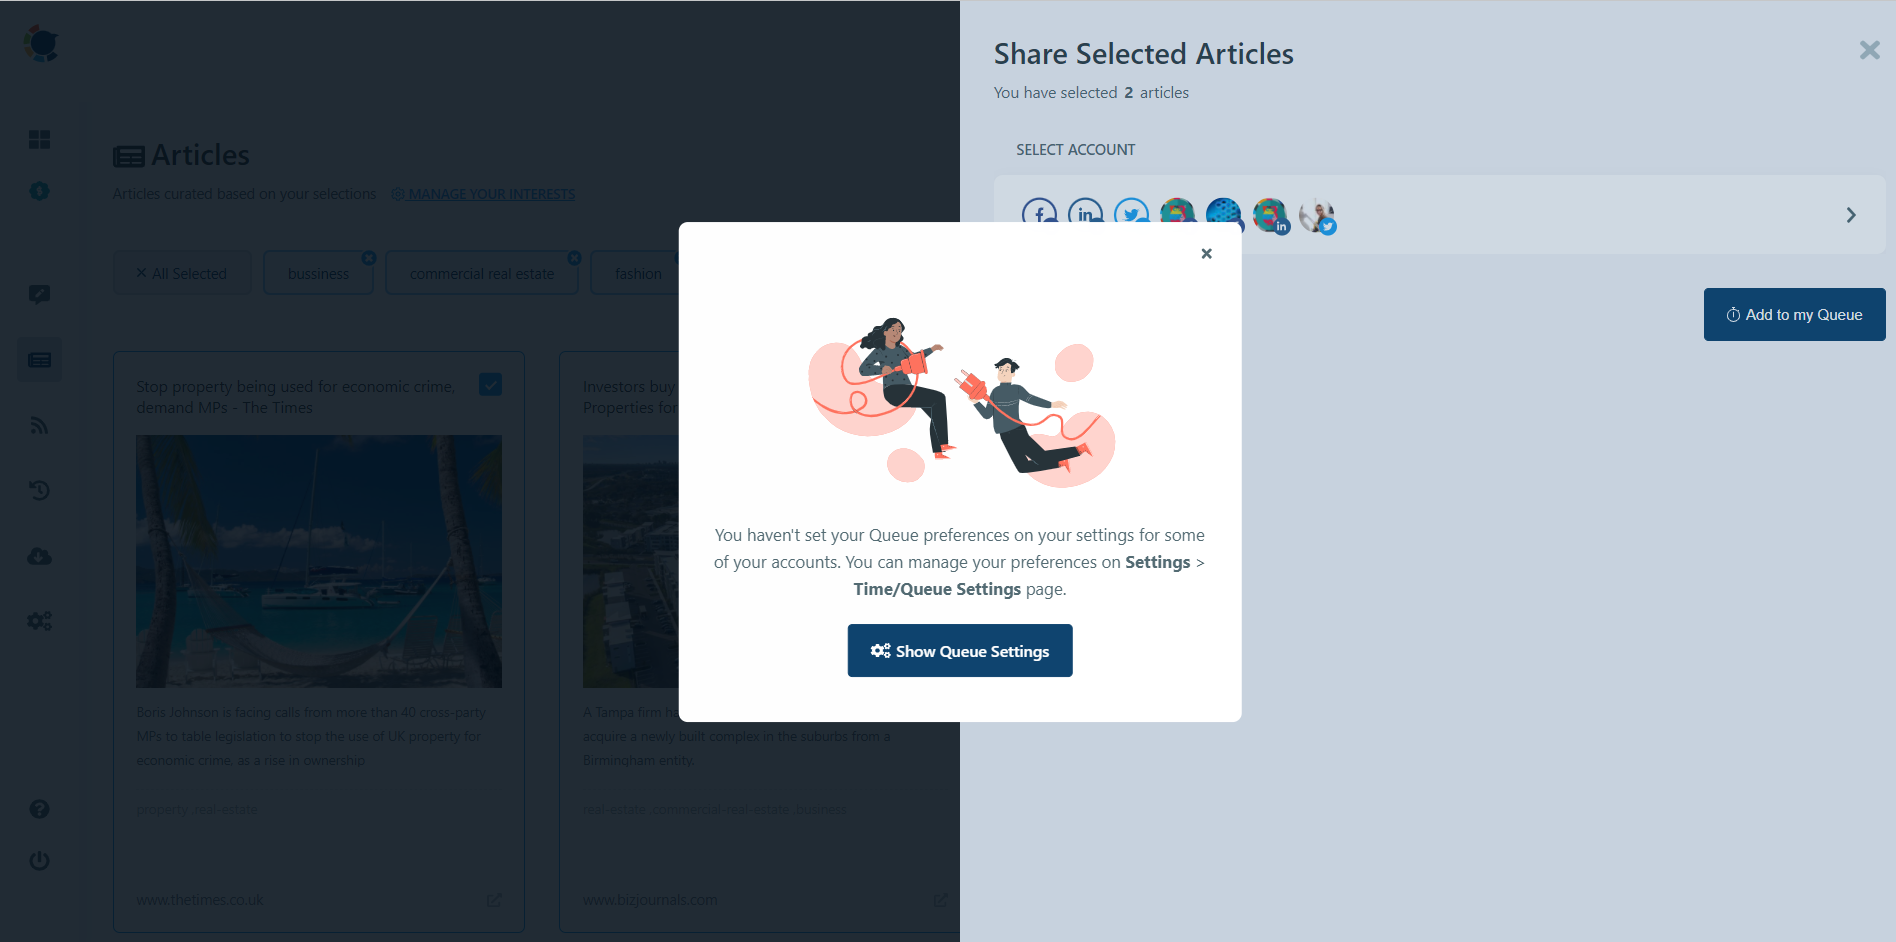 Take your article curator and get started with article curation!